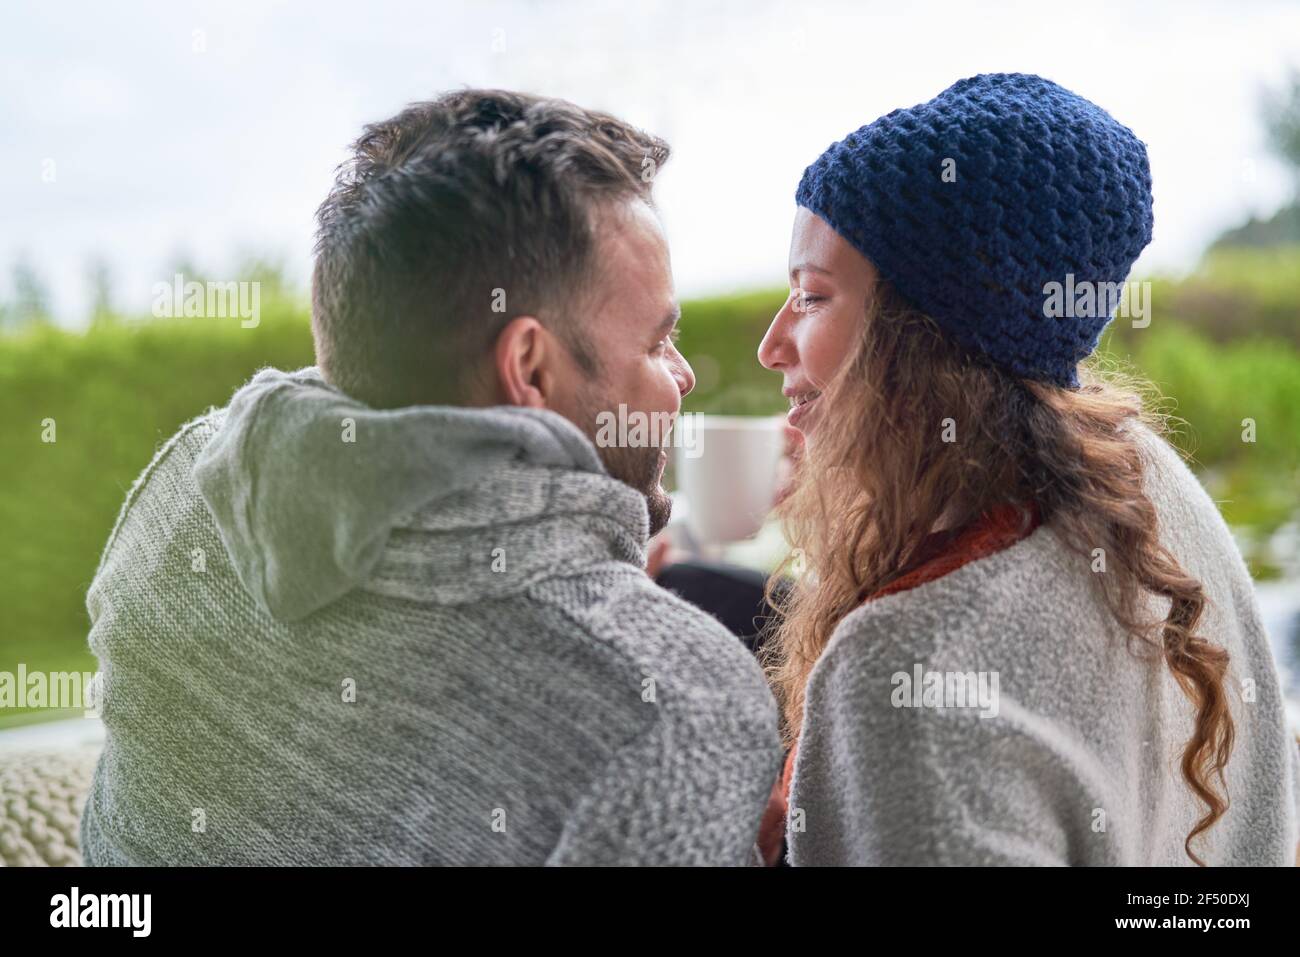 Affectionate romantic couple face to face Stock Photo